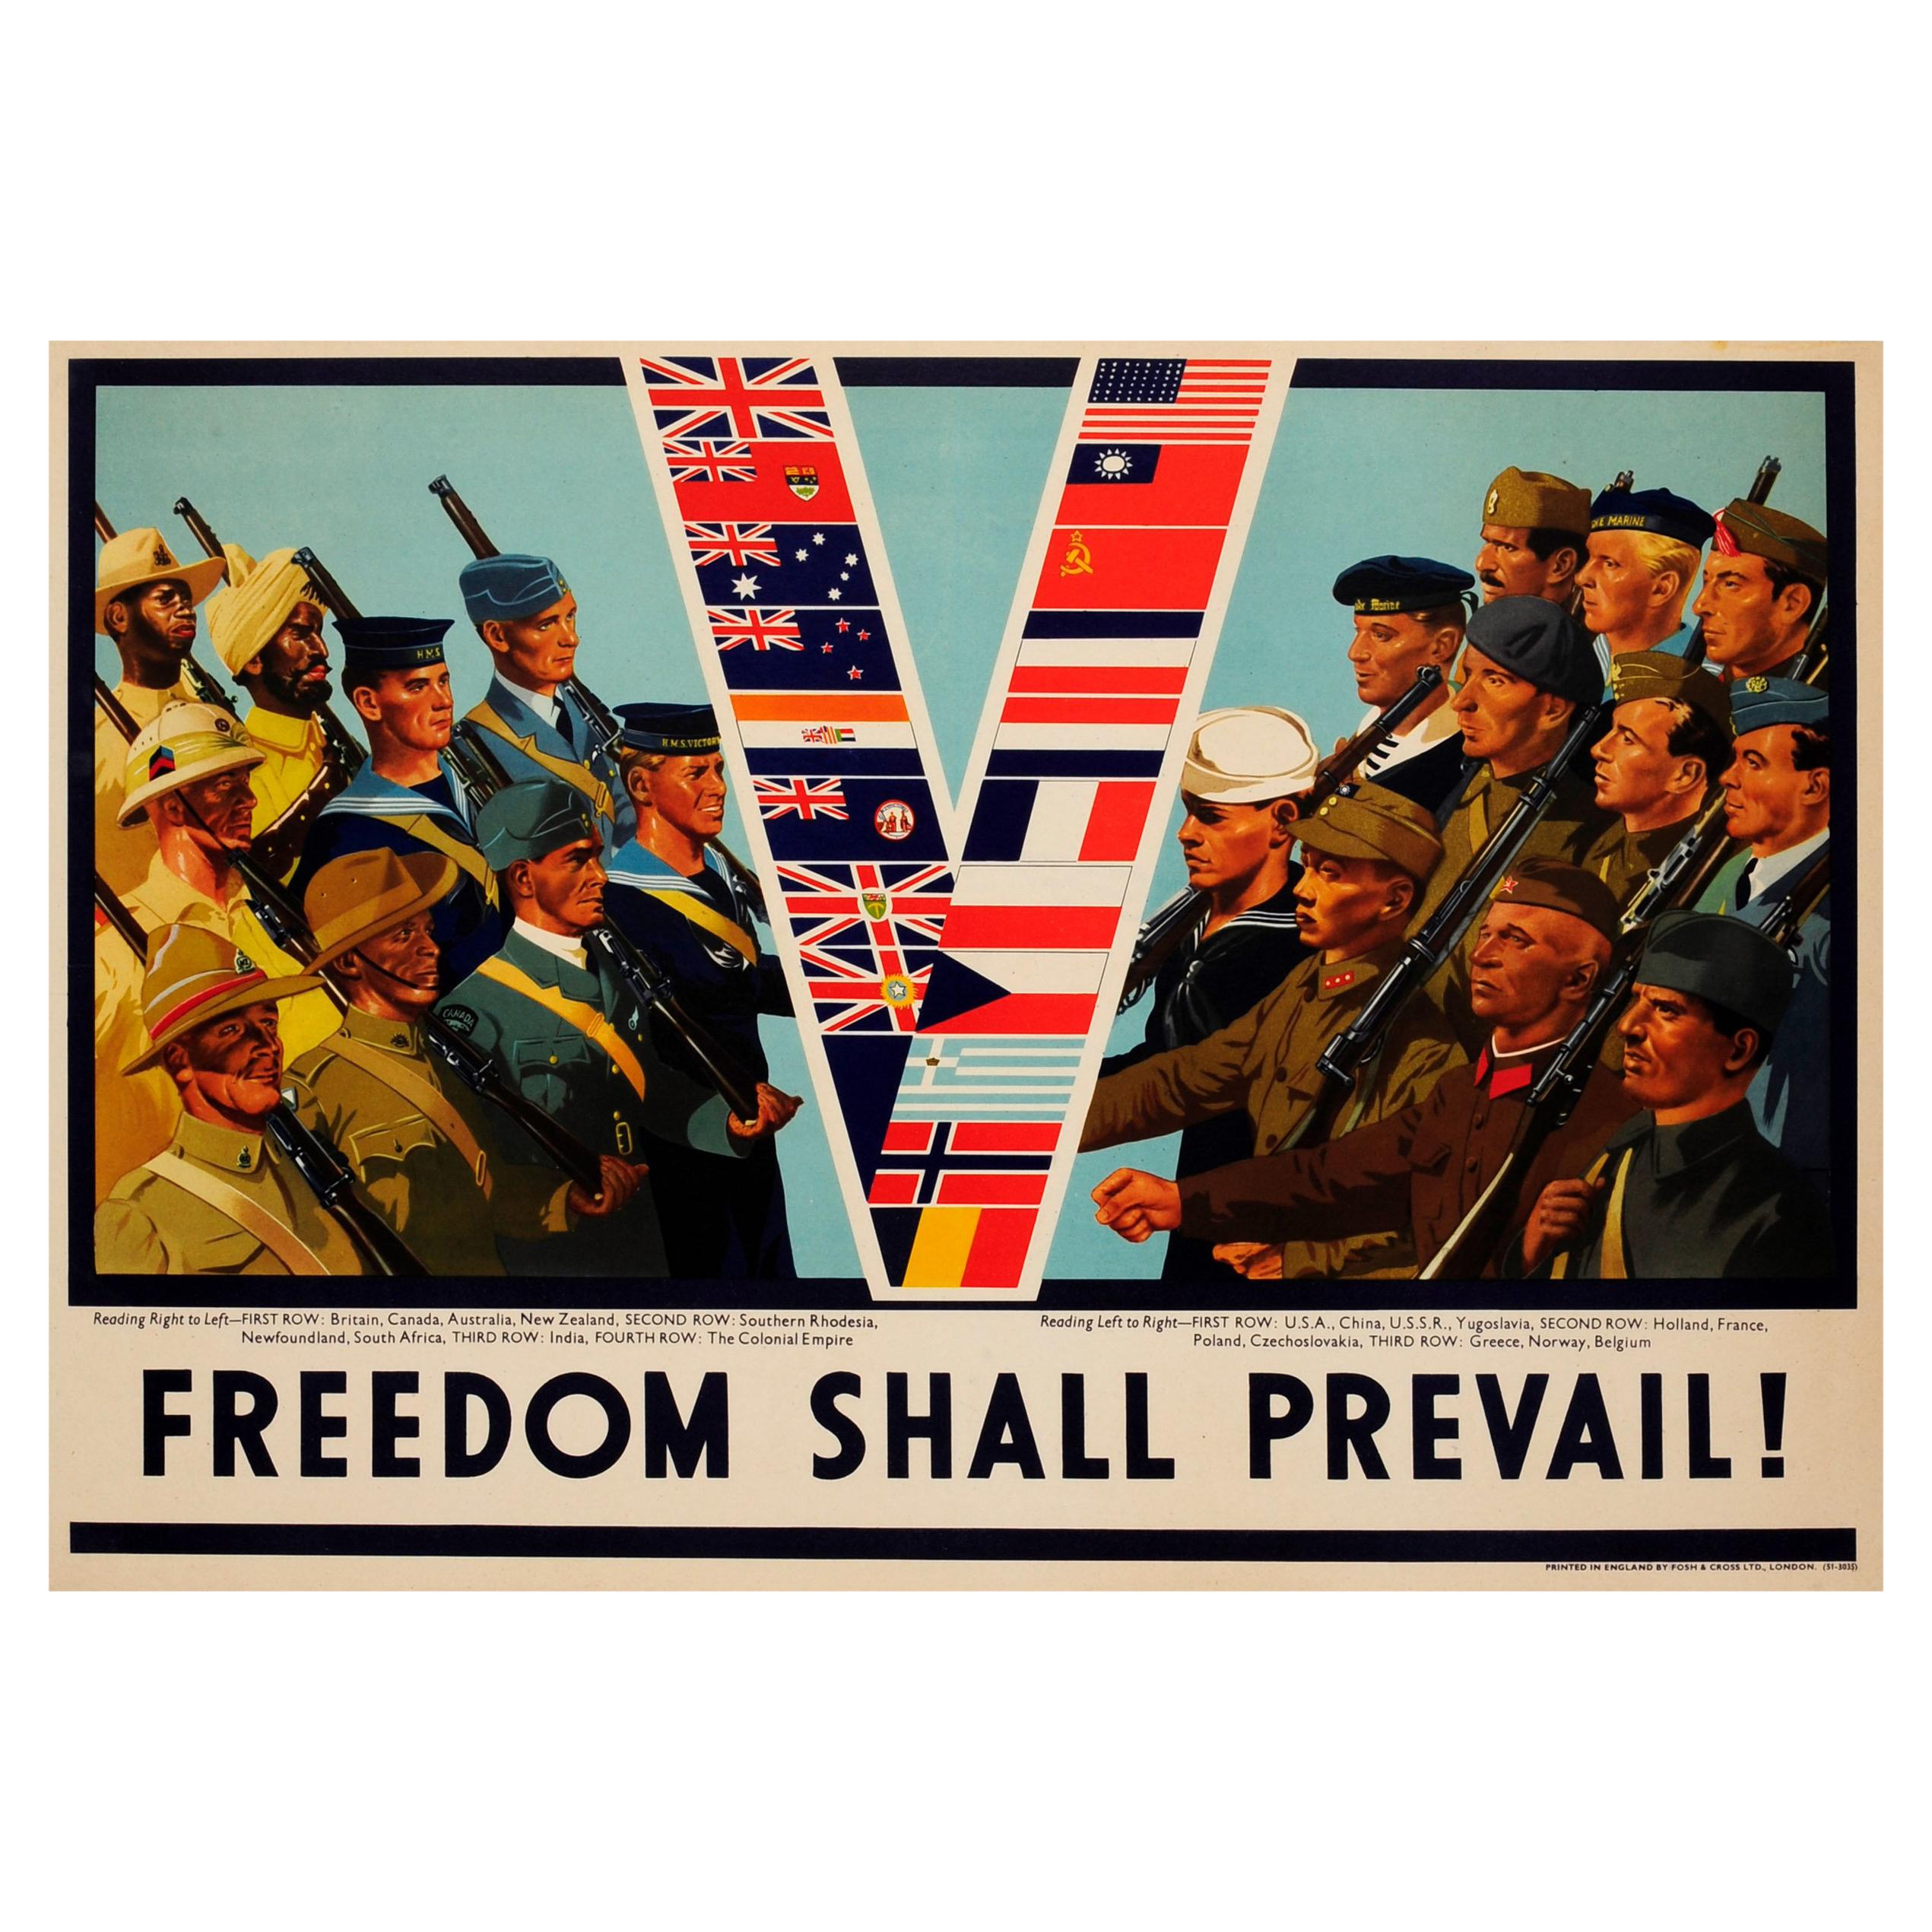 Original 1940s World War Two Poster Freedom Shall Prevail Allies Victory V Flags